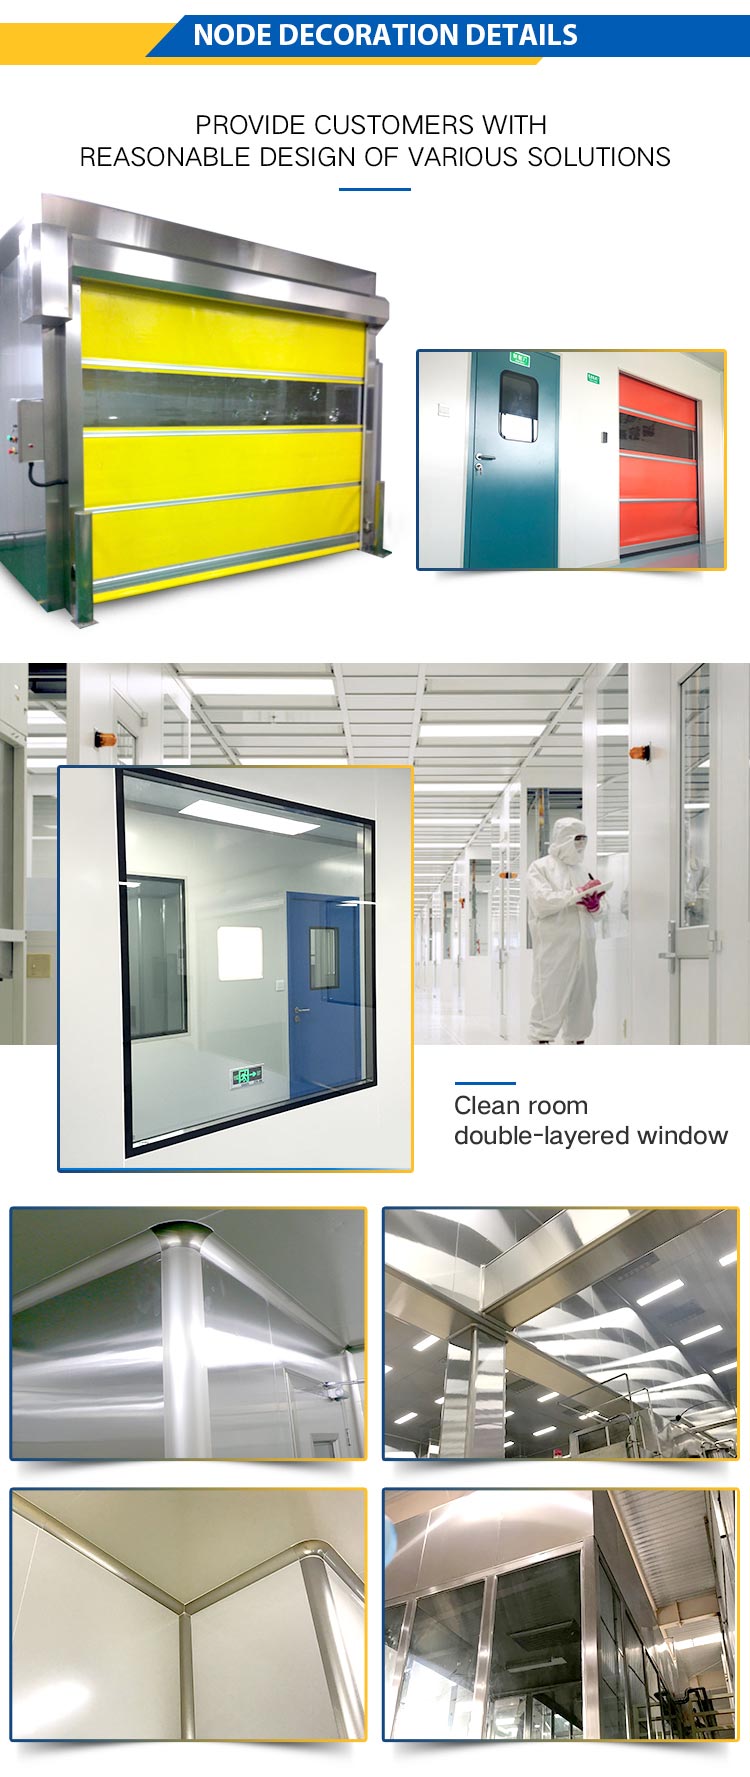 Before clean room construction, what points should be paid attention to in clean room design?